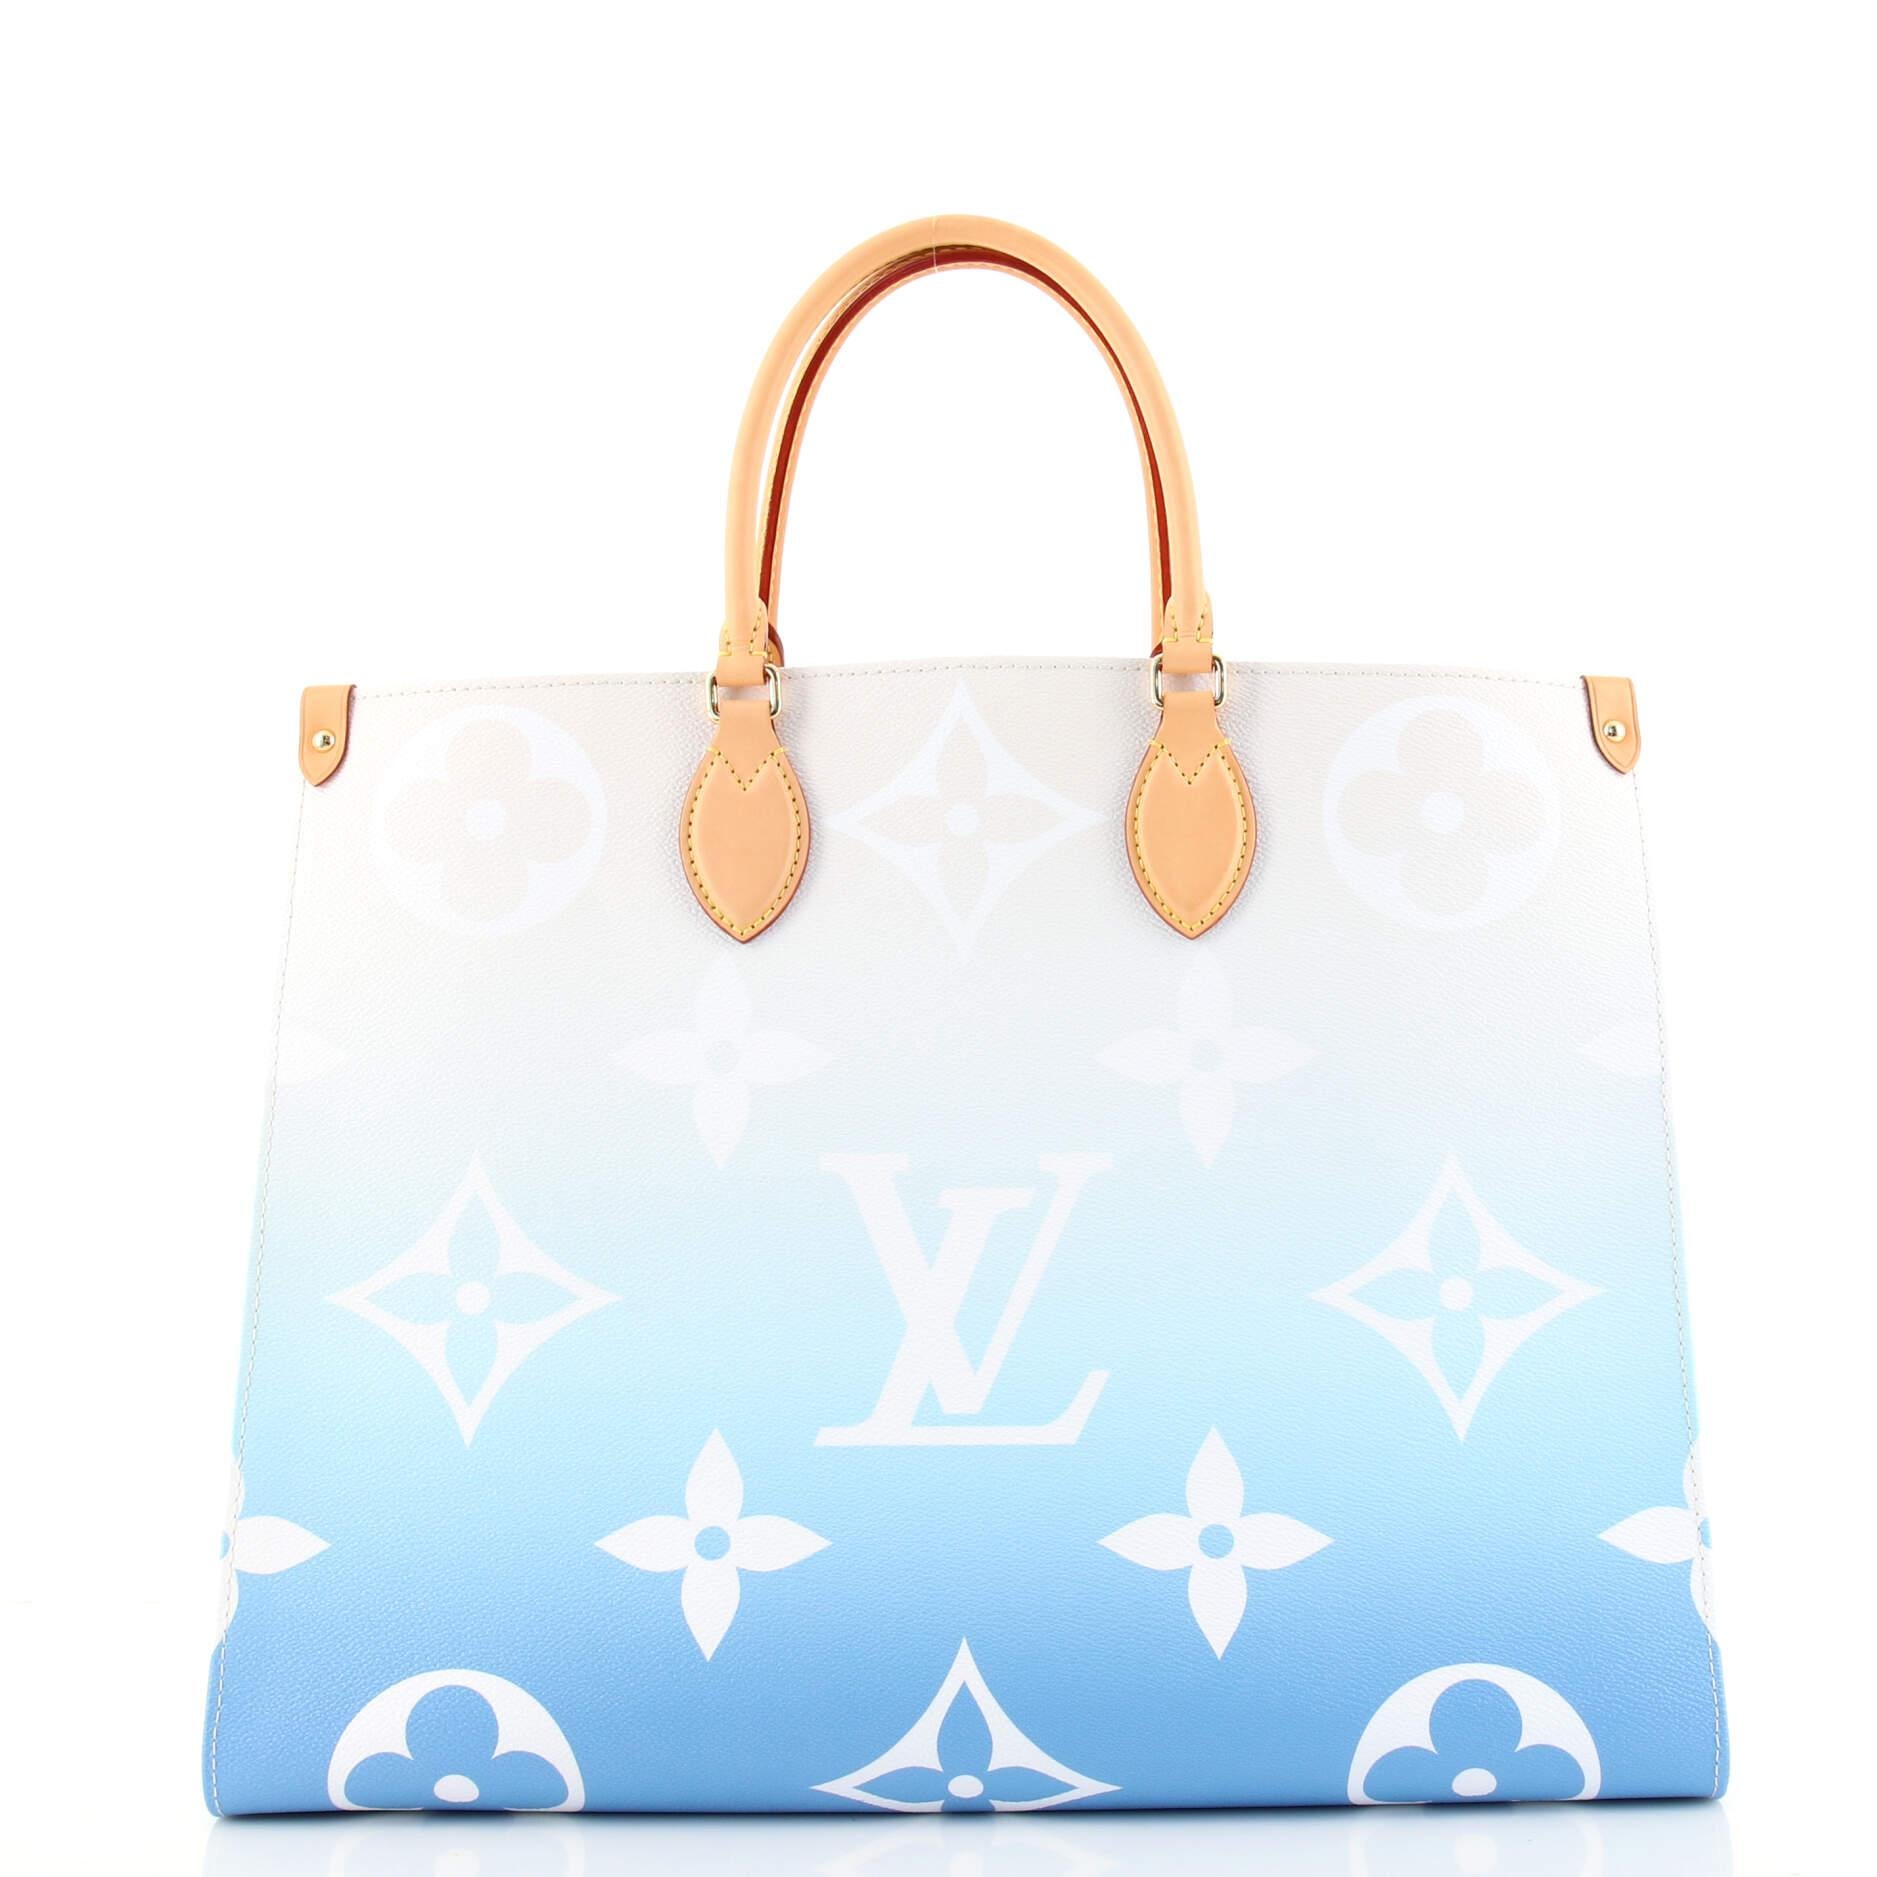 Blue Louis Vuitton OnTheGo Tote By The Pool Monogram Giant GM